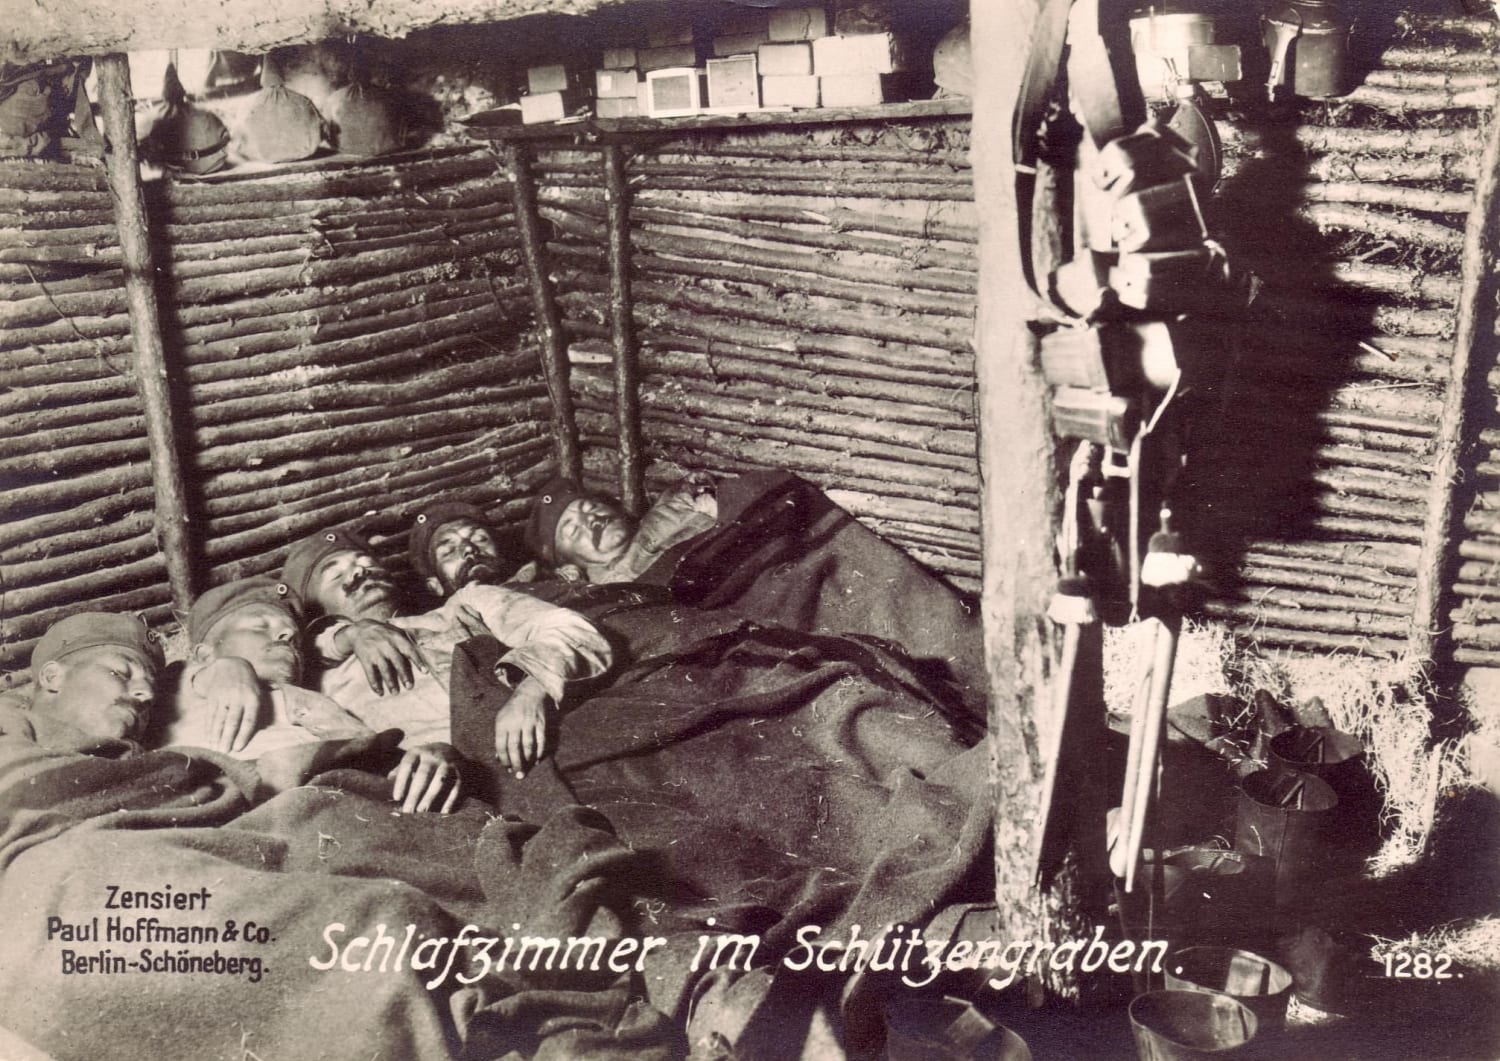 German soldiers sleeping in the trenches during World War I, 1915.